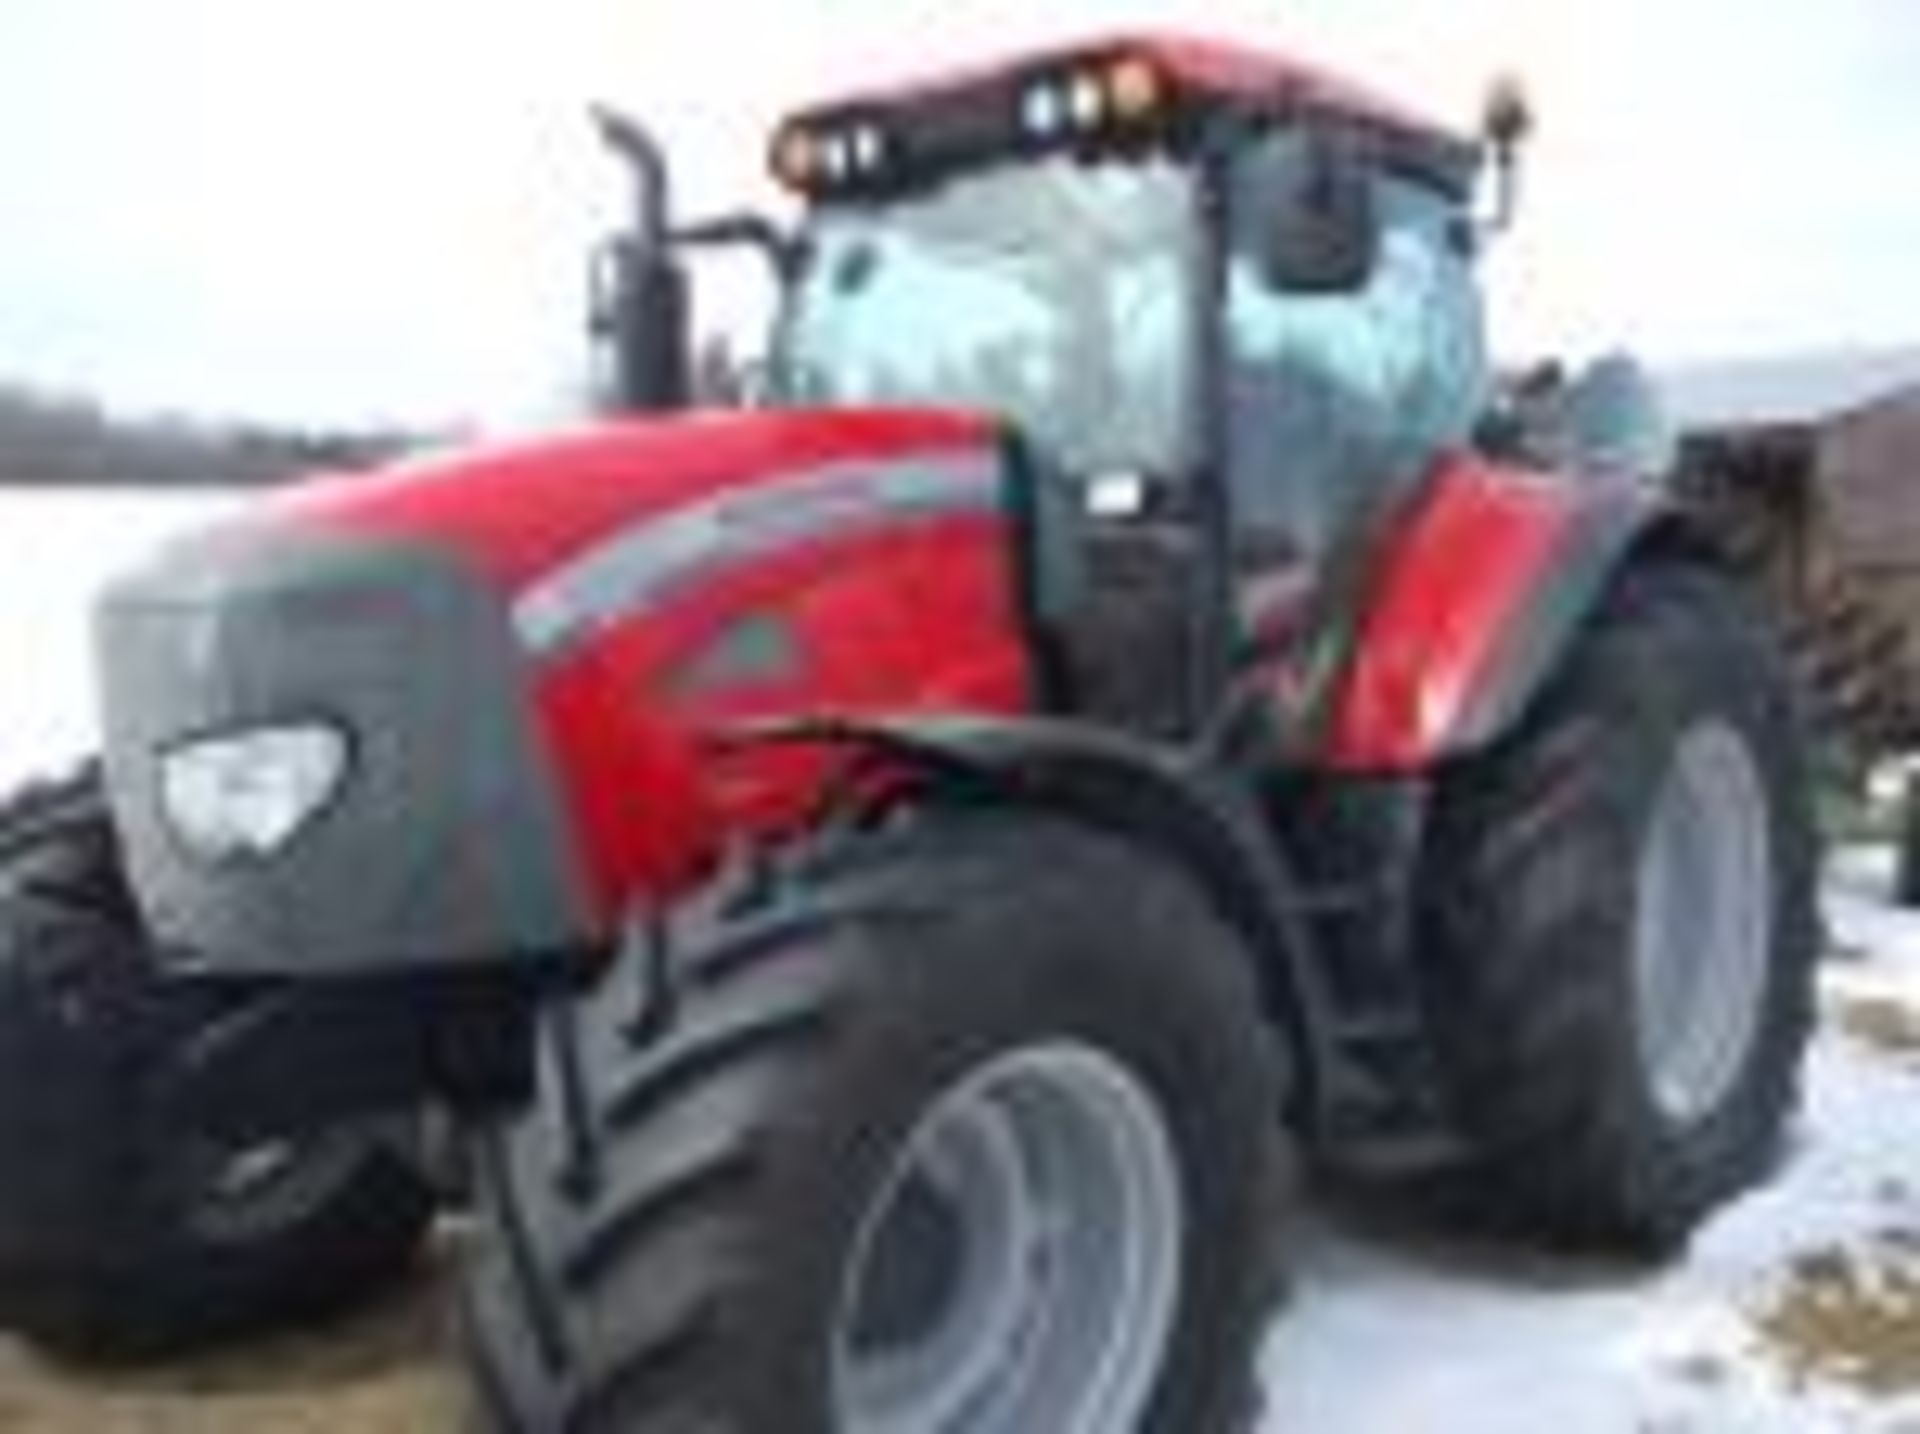 2011 McCormick XTX 165 tractor, approx. 600 hours, 3 point hitch, radial tires, 32 speed power